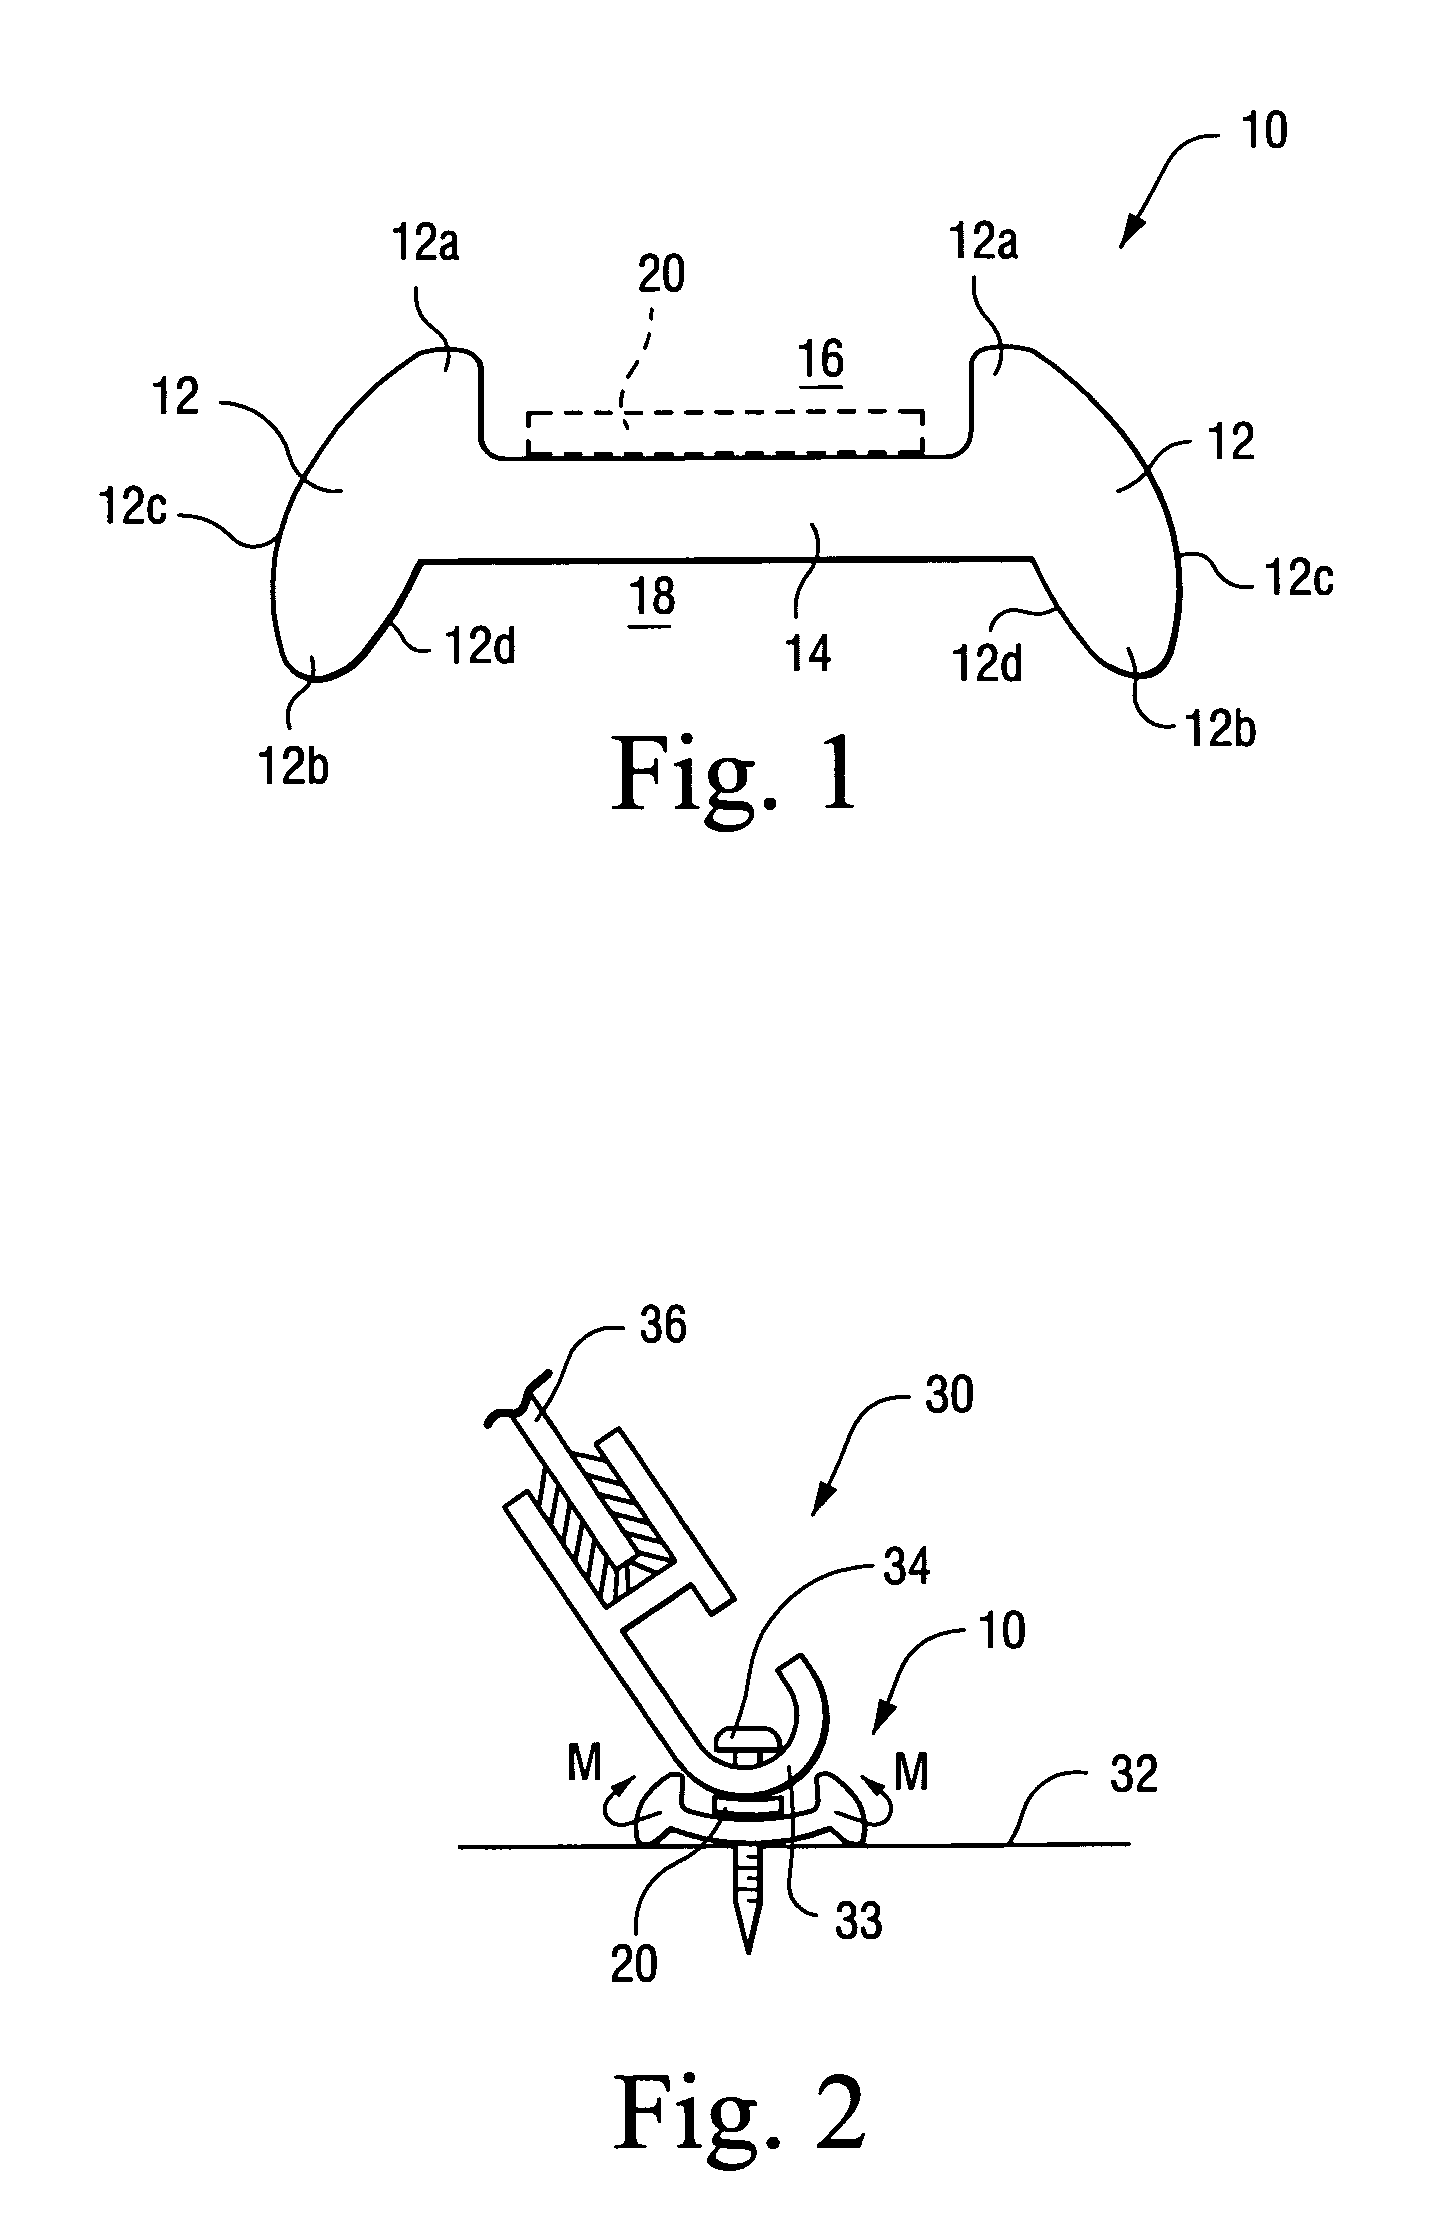 Gasket for supporting and sealing a curved object